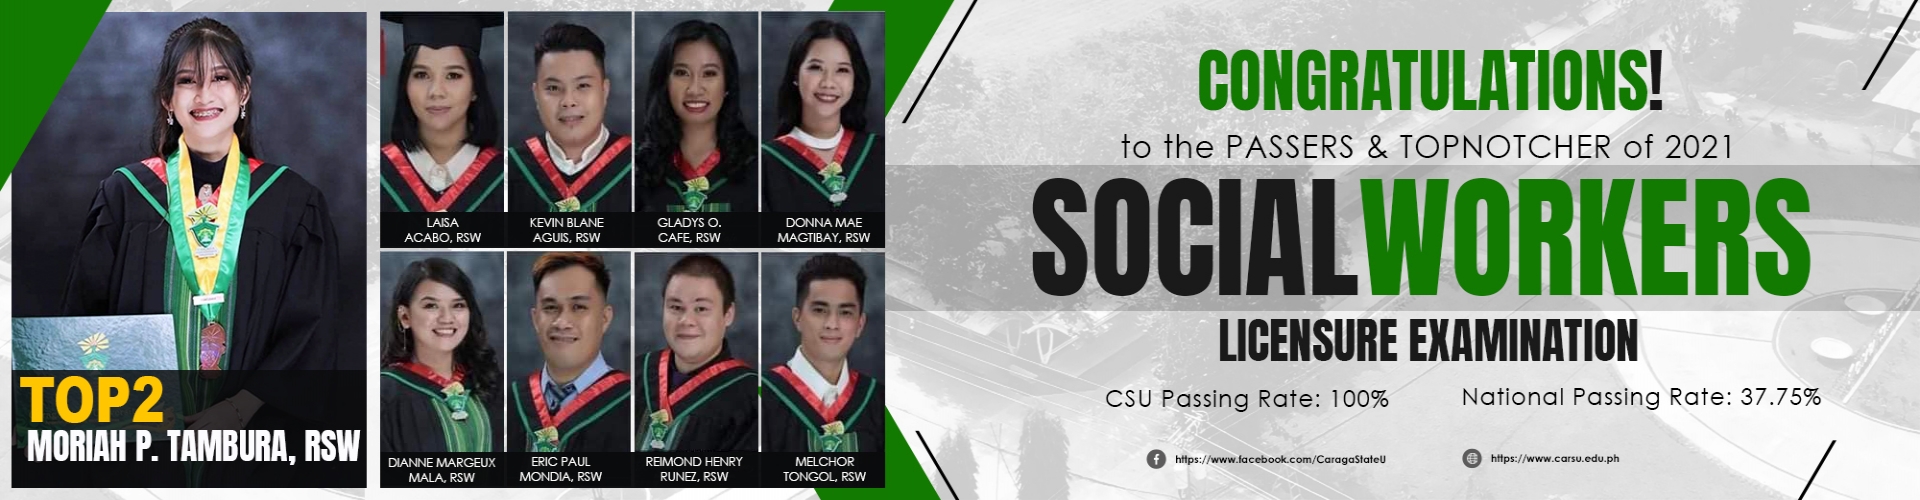 CSU Passers and Topnotcher 2021 Licensure Examination for Social Workers